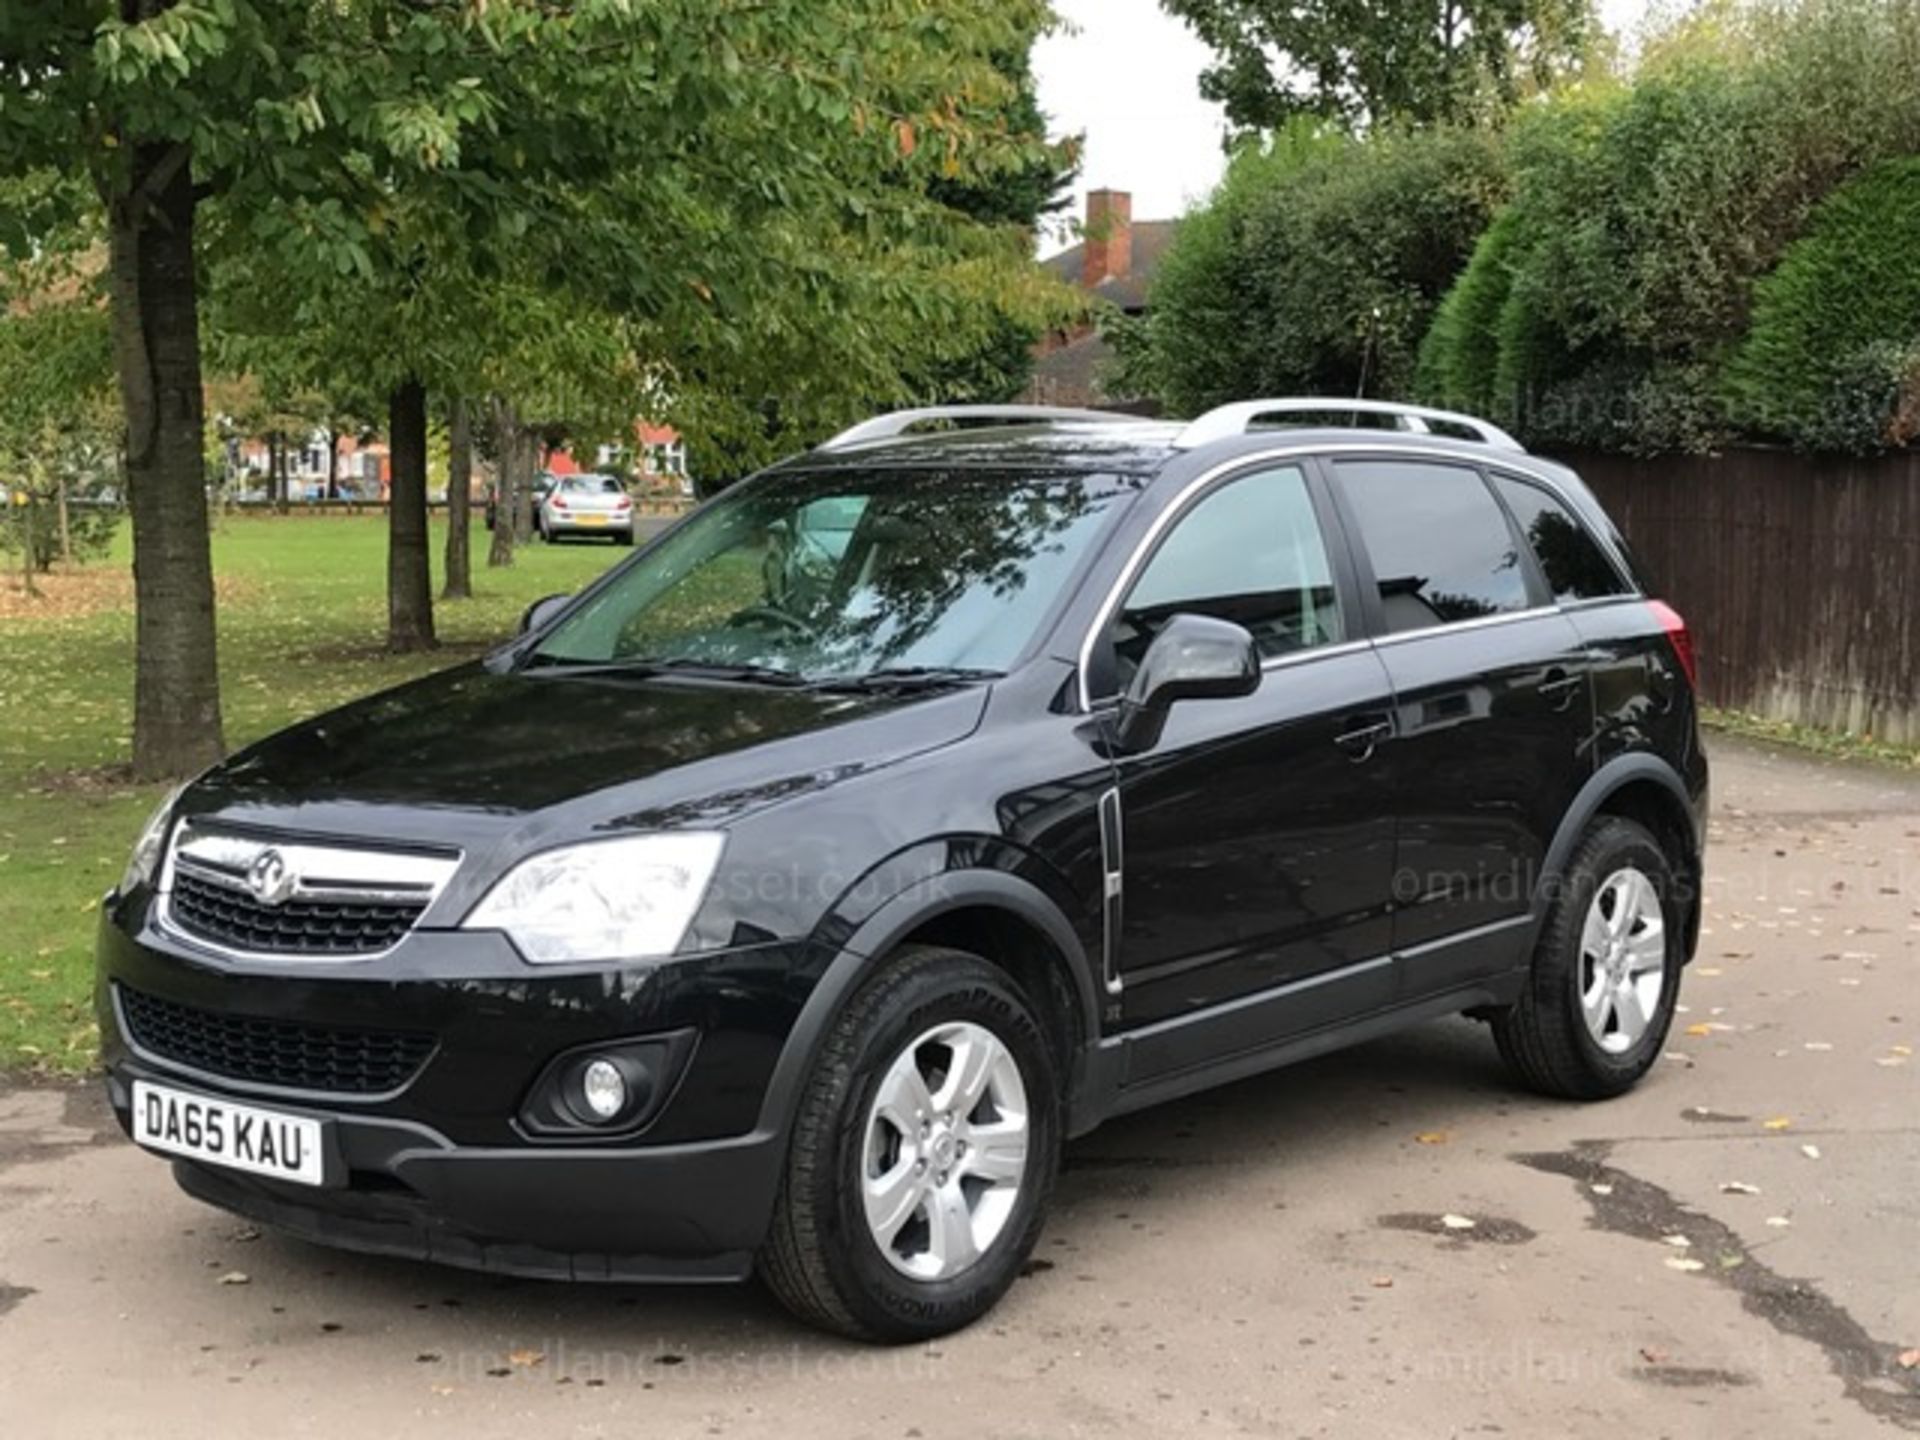 2015/15 REG VAUXHALL ANTARA EXCLUSIVE 2.2 CDTI ONE FORMER KEEPER FULL SERVICE HISTORY - Image 2 of 9